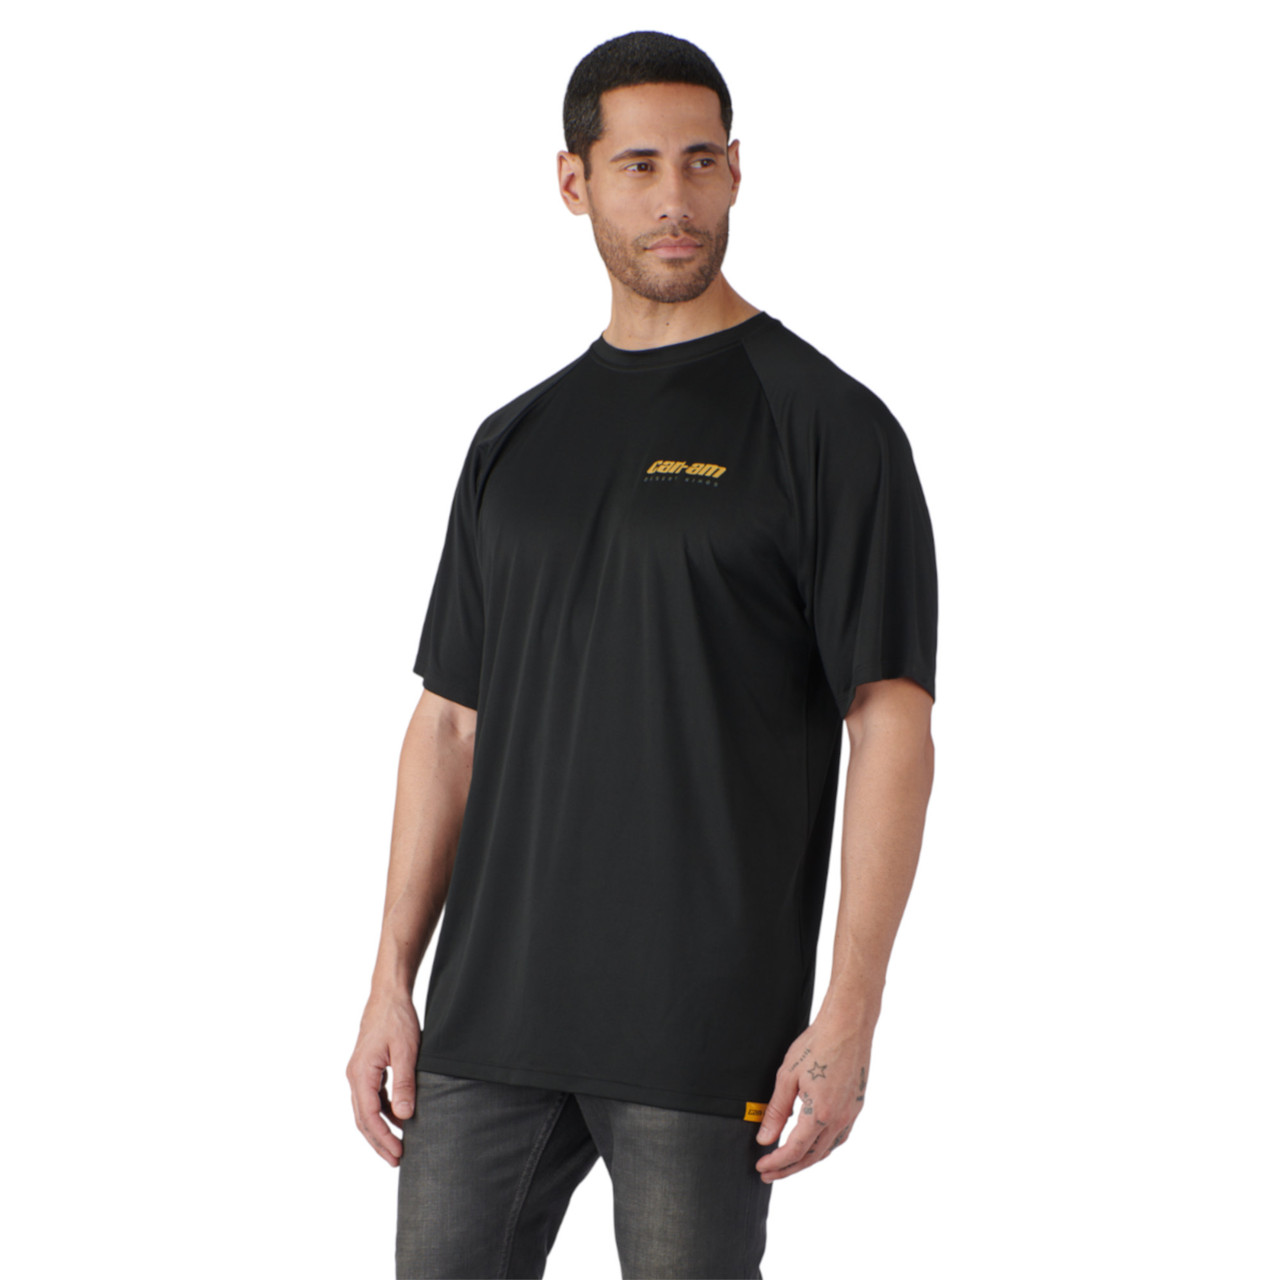 Can-Am New OEM Men's 2XL Cotton Polyester Performance T-Shirt 4547631490